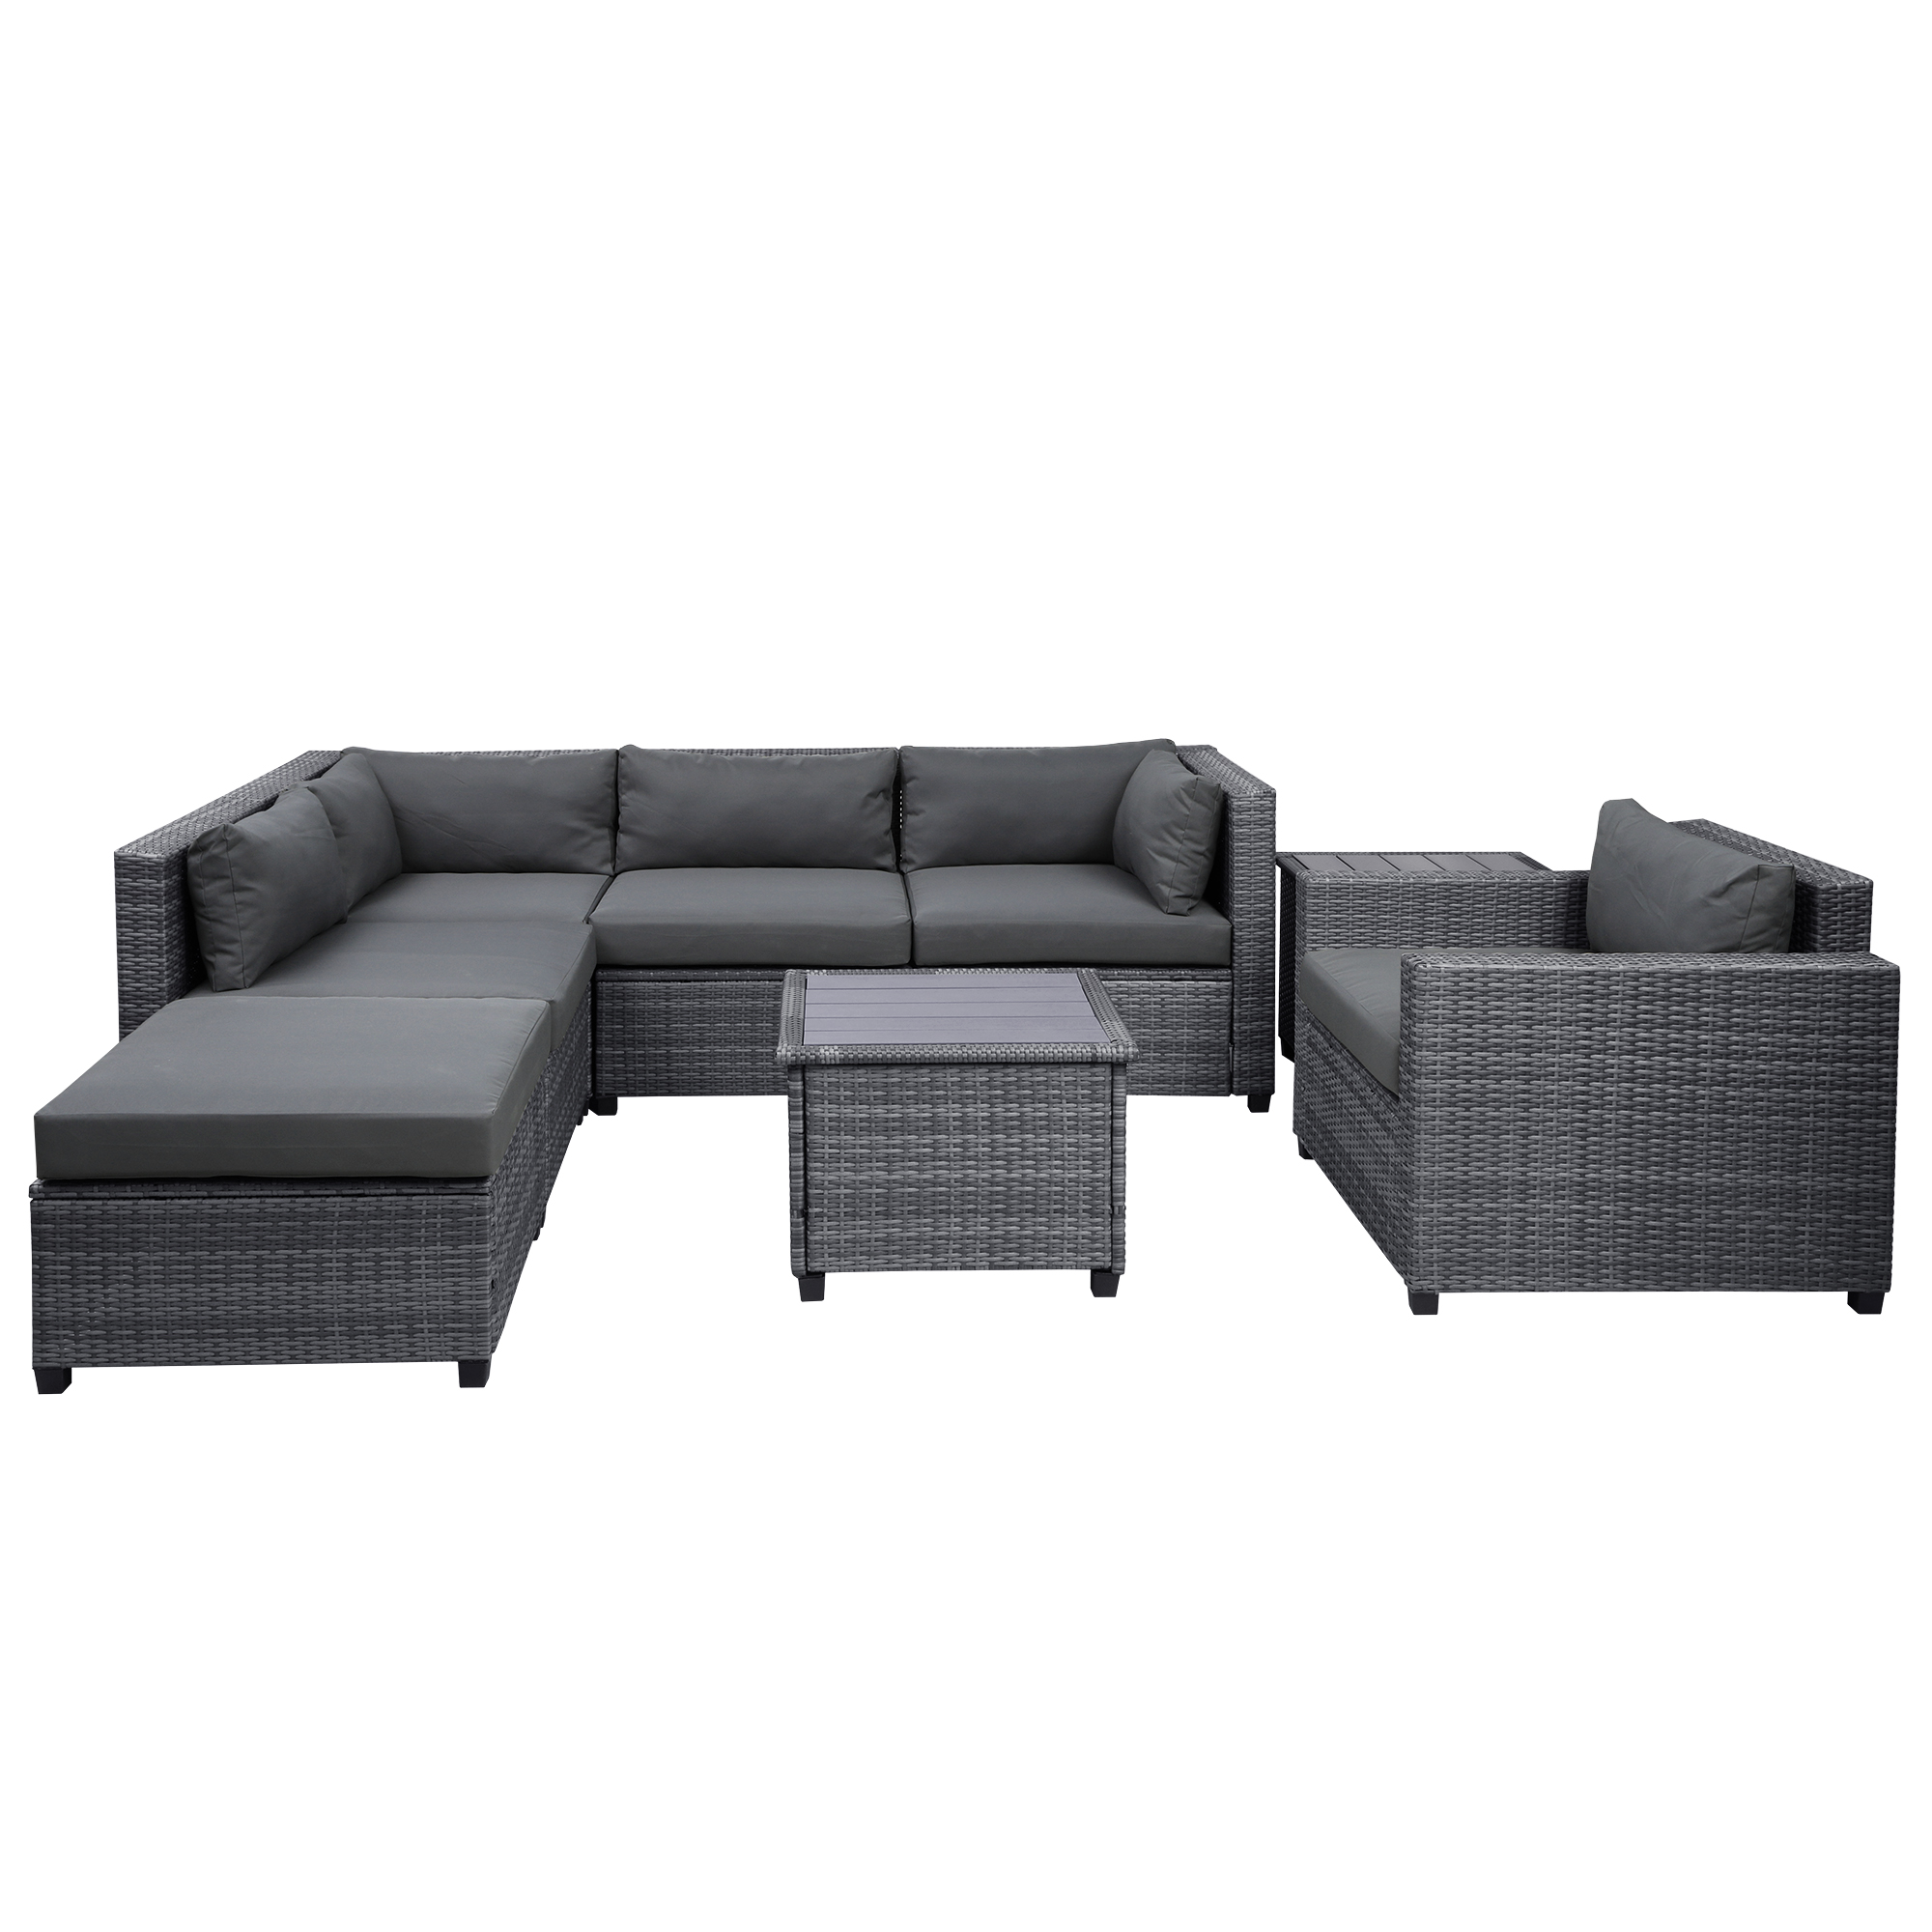 8 Piece Rattan Sectional Seating Group with Cushions, Patio Furniture Sets, Outdoor Wicker Sectional-CASAINC